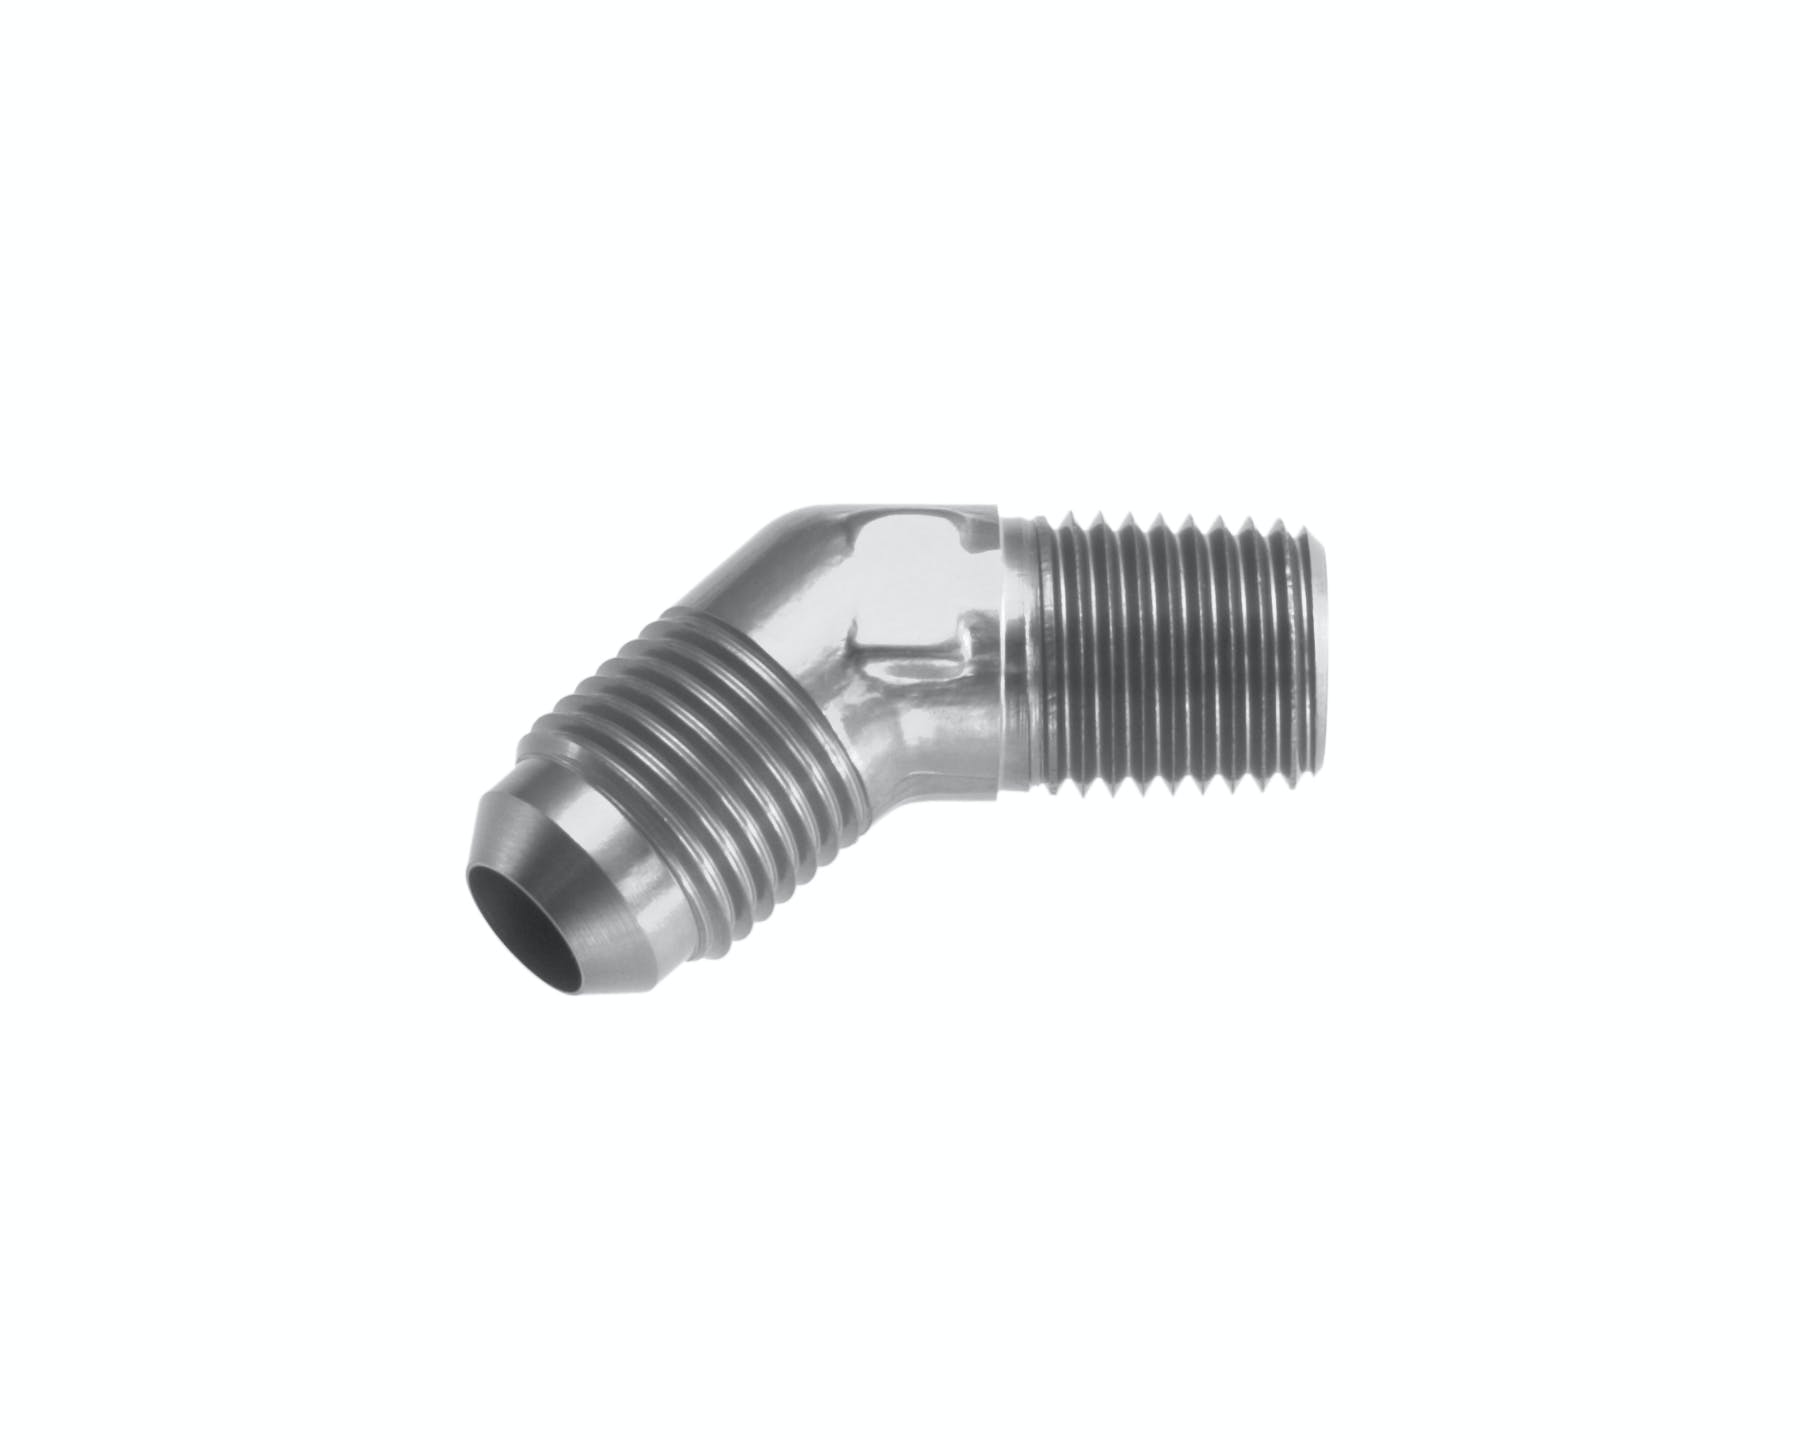 Redhorse Performance 823-04-02-5 -04 45 degree Male adapter to -02 (1/8in) NPT Male - clear